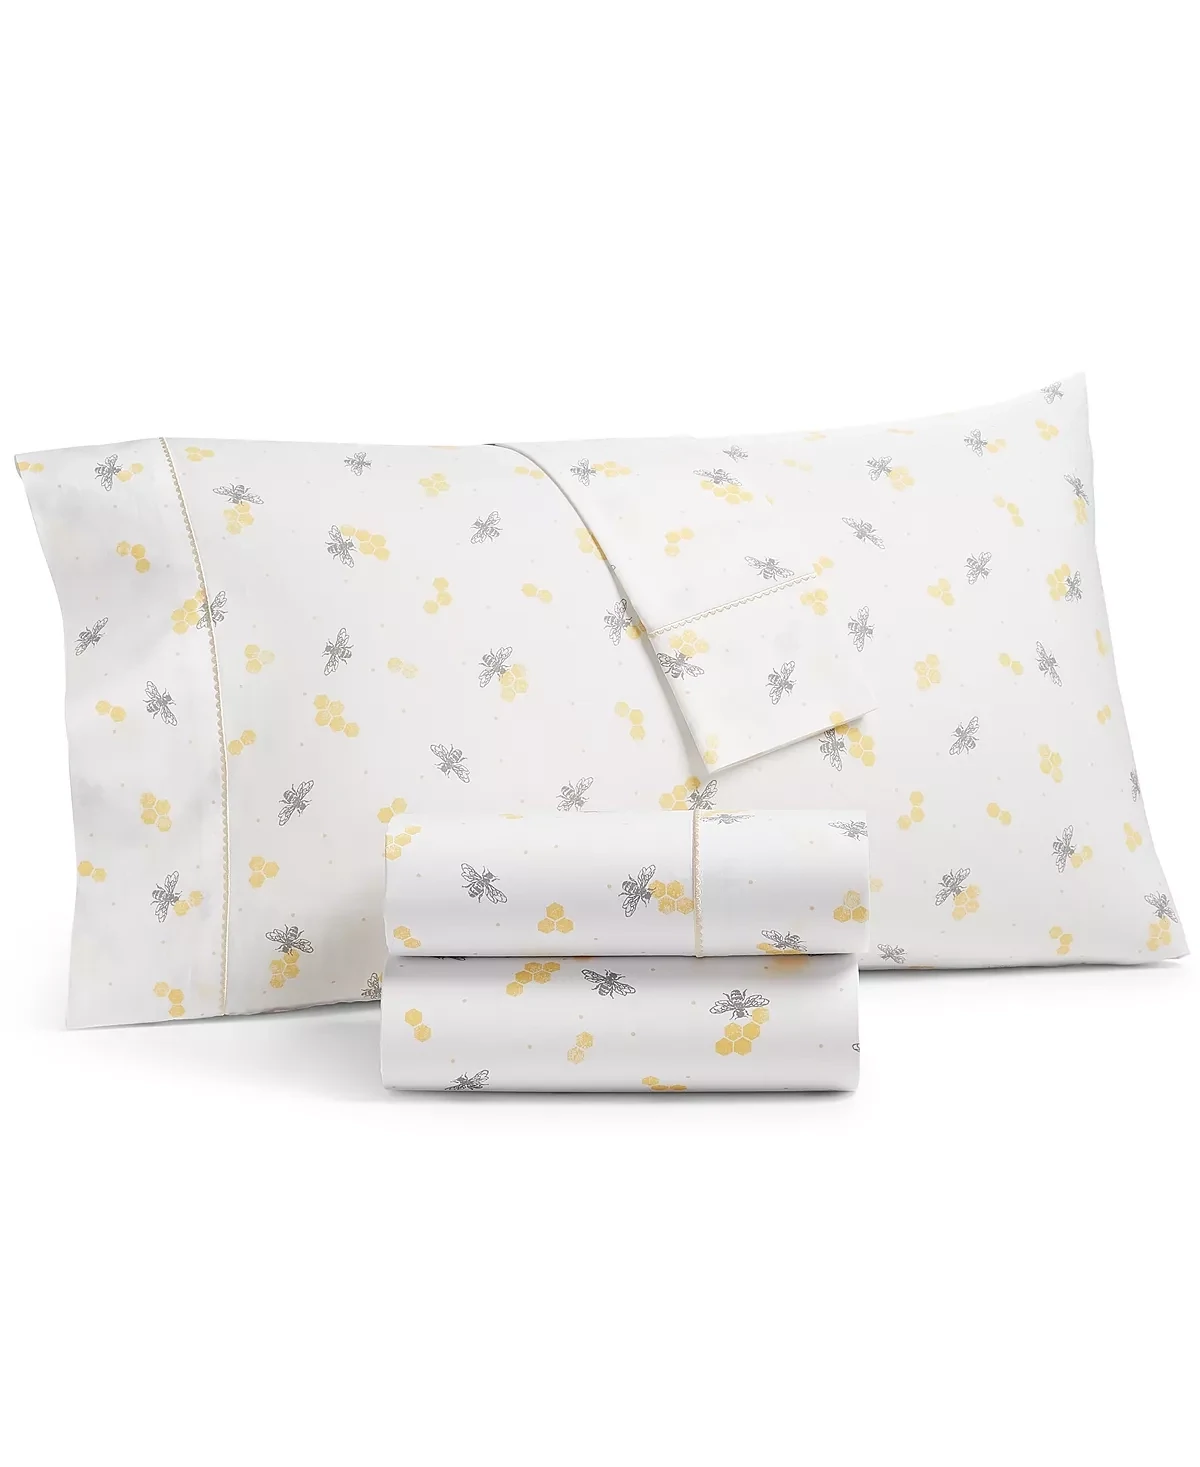 Martha Stewart Collection Printed 400 Thread Count 100% Egyptian Cotton Percale 4-Pc. Sheet Set, Full, Bee